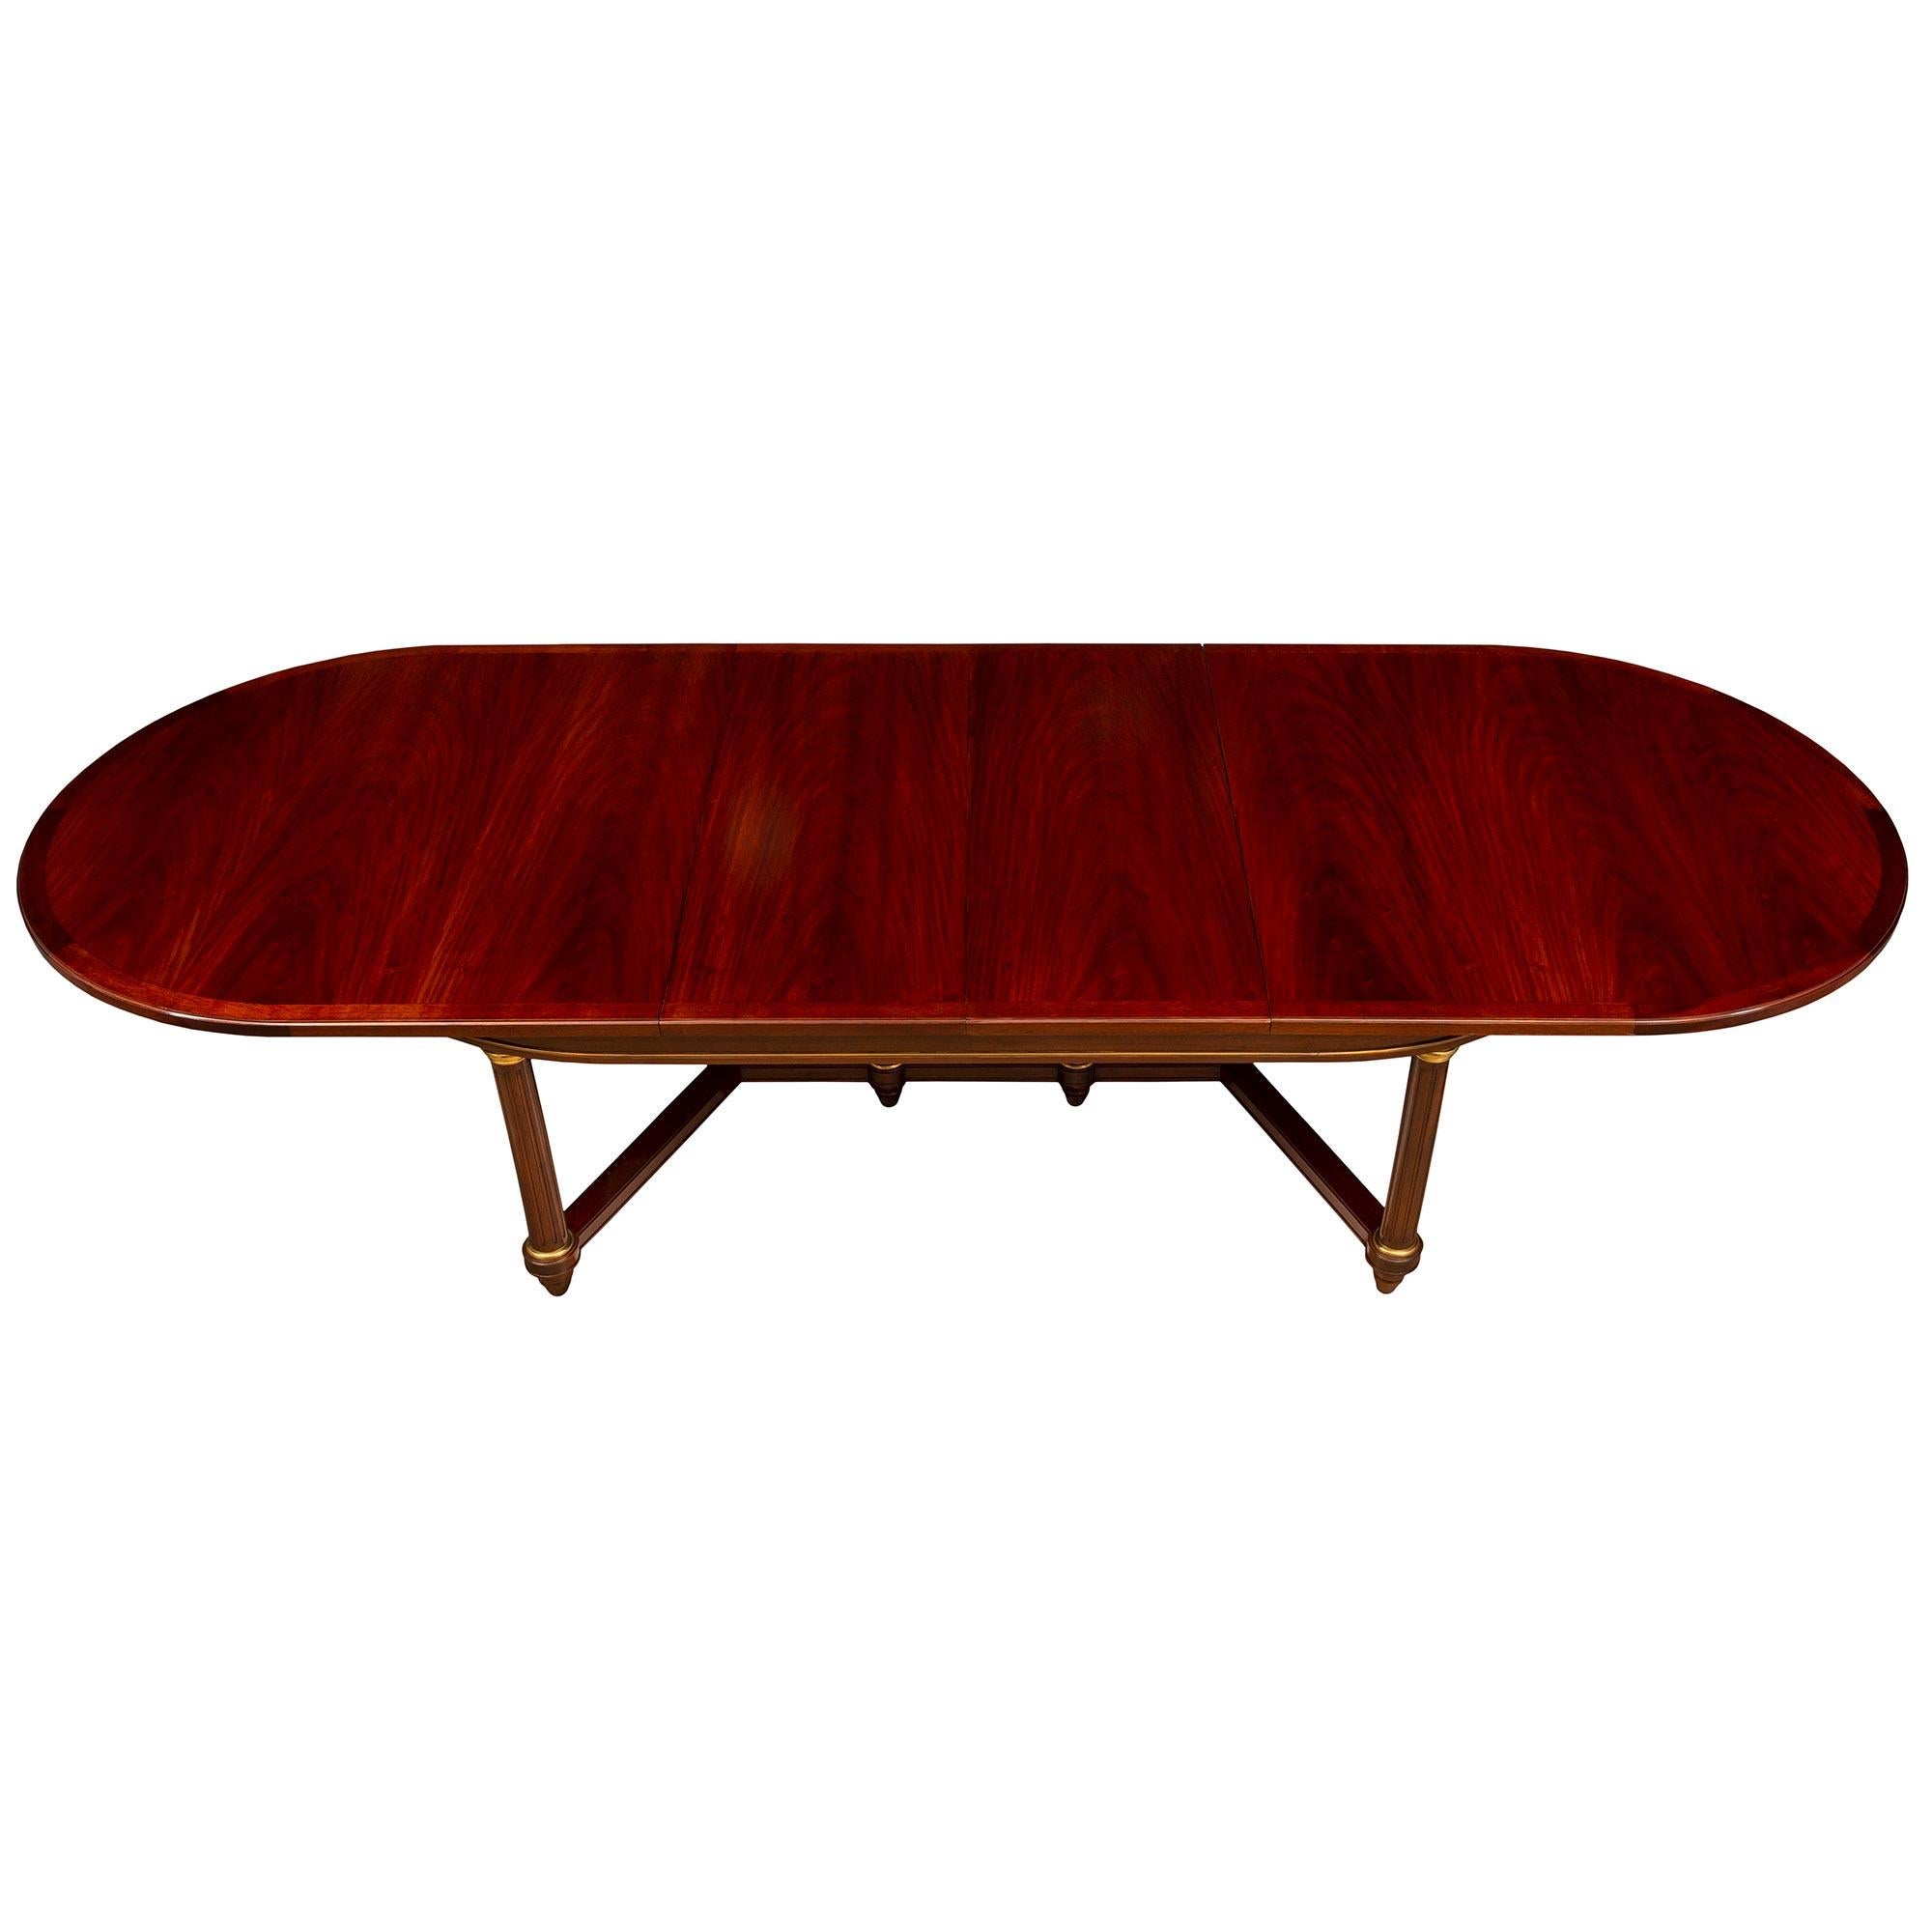 French Turn of the Century Empire St. Flamed Mahogany and Ormolu Dining Table In Good Condition For Sale In West Palm Beach, FL